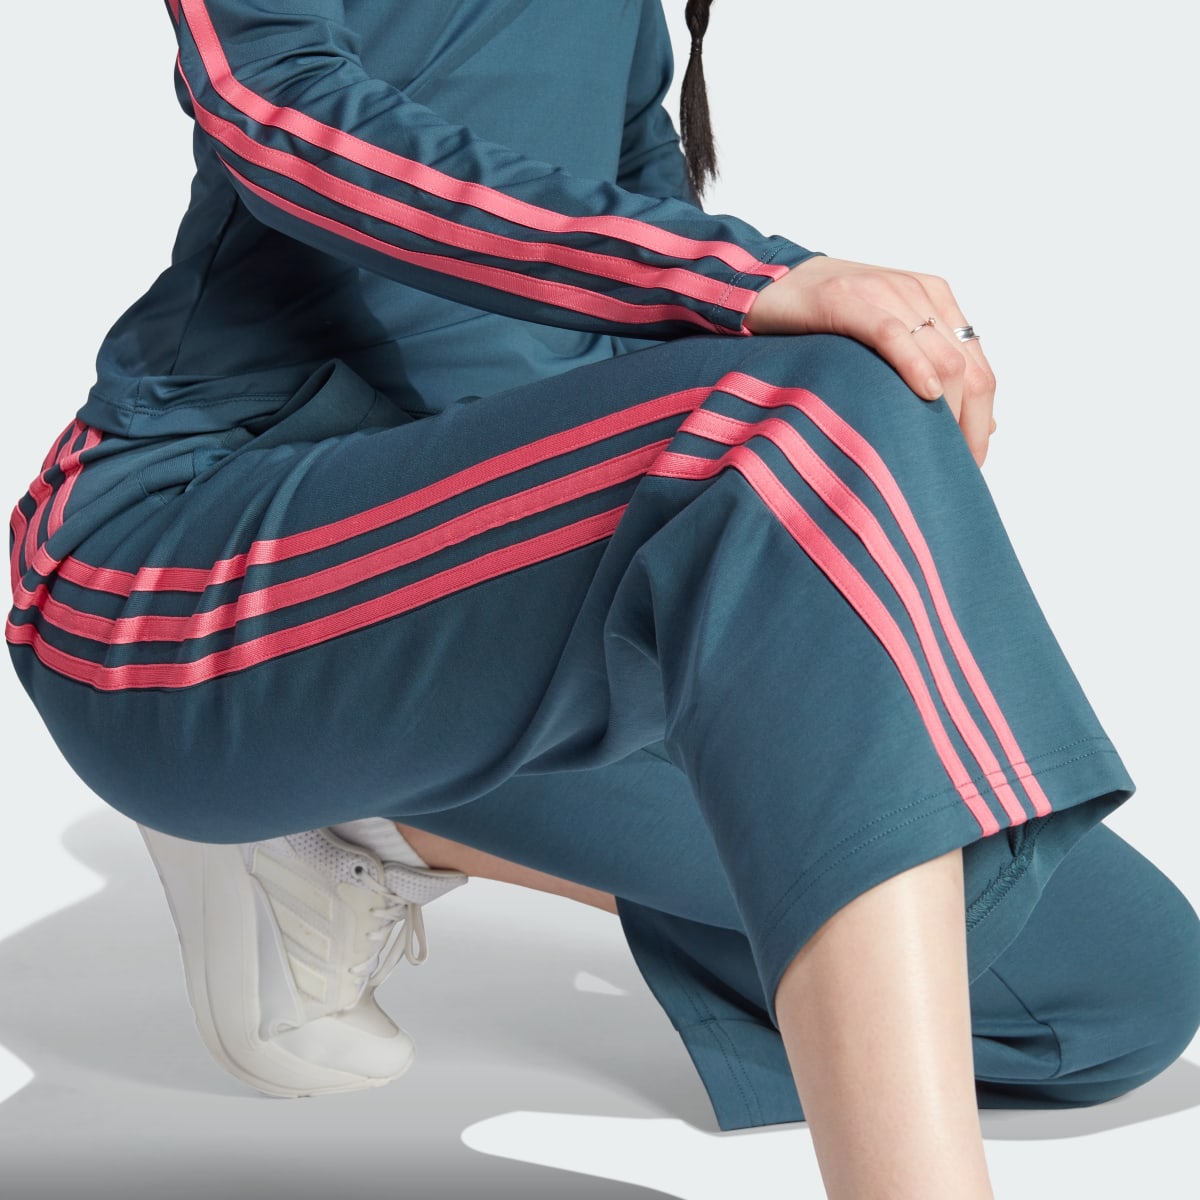 Adidas Future Icons 3-Stripes Tracksuit Bottoms. 6